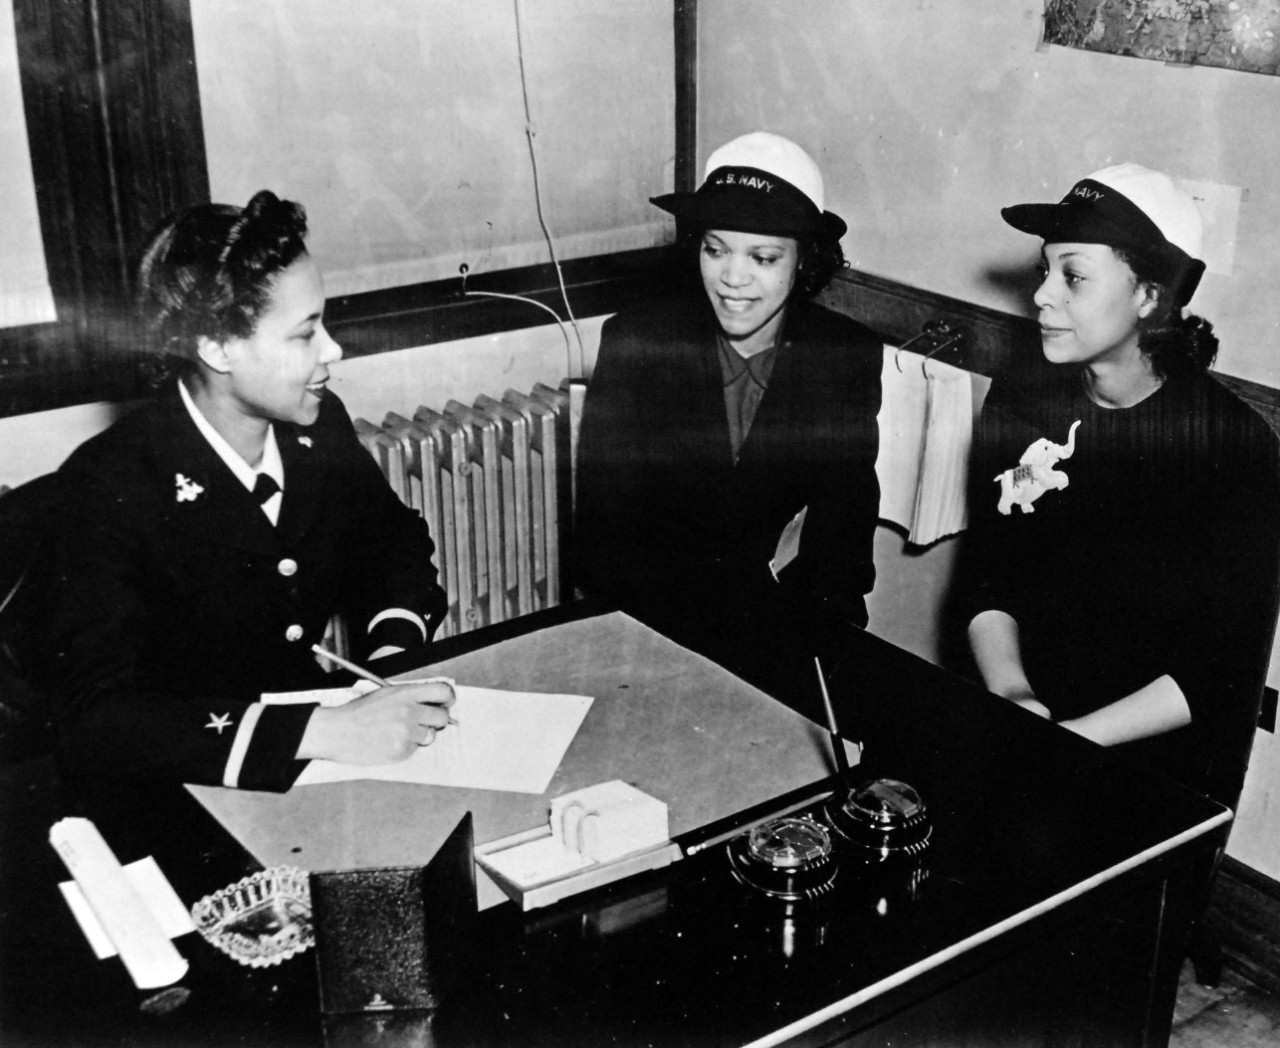 208-NP-8CC-1:  African American Women Recruits in Naval Reserve, 1944.   Ensign Francis Willis, one of the first two African American naval officers in the Women’s Reserve, is interviewing two African American enlisted WAVES.  Official U.S. Navy photograph, now in the collections of the National Archives.  